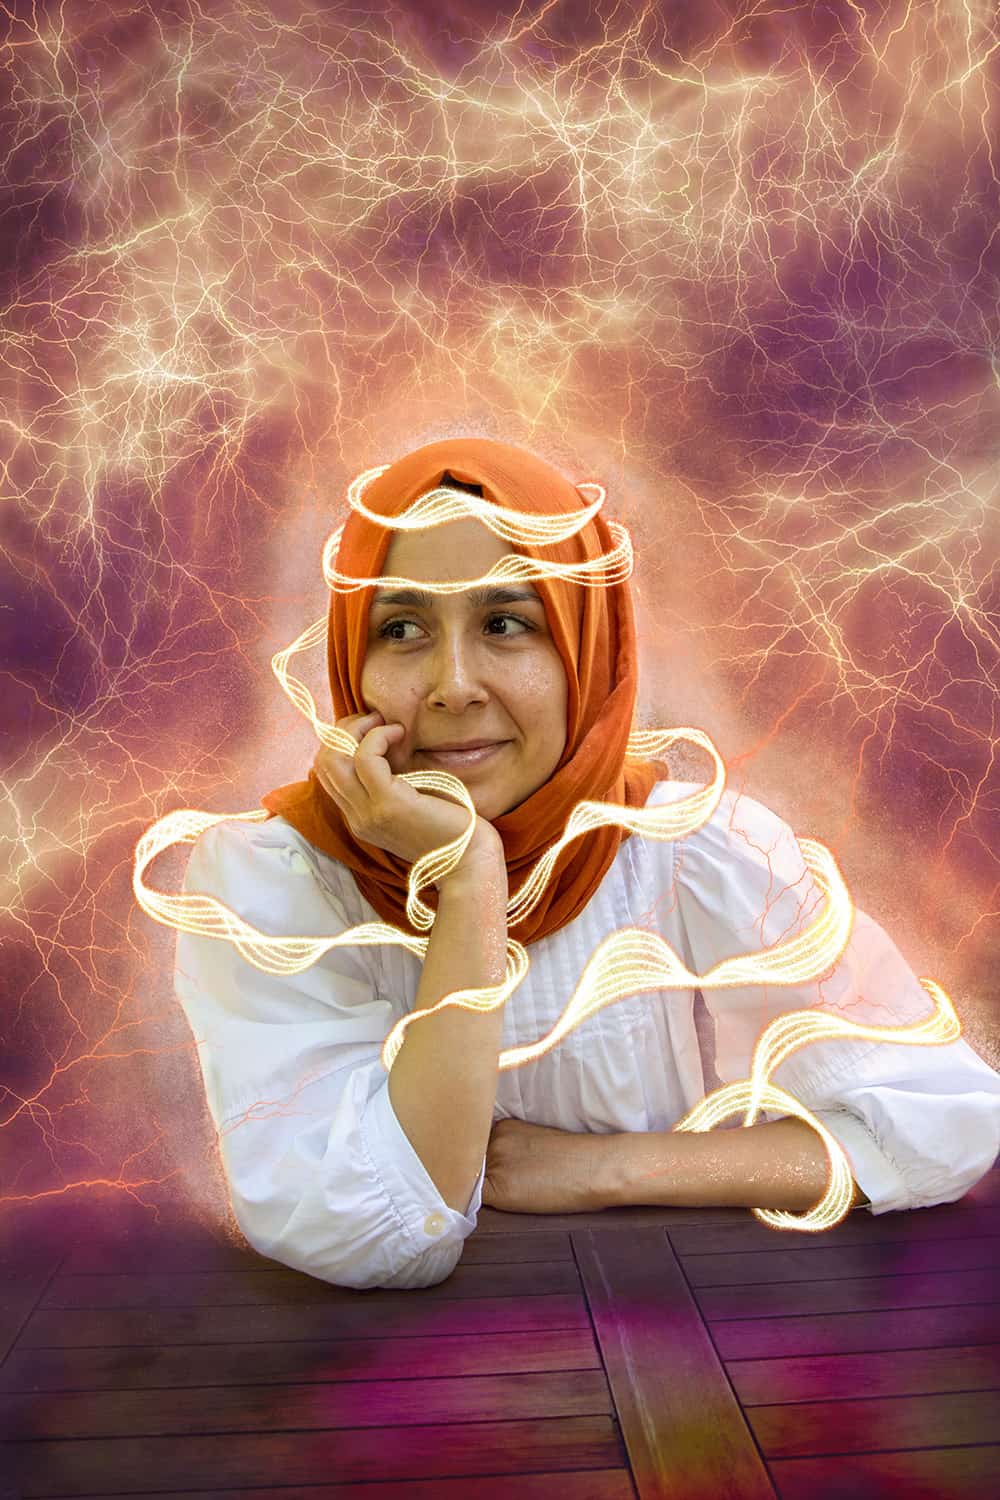 Soul Signs Energetic Portraiture of Fatma, Spiritual art showing her energy in the form of sunshine around a photo of her